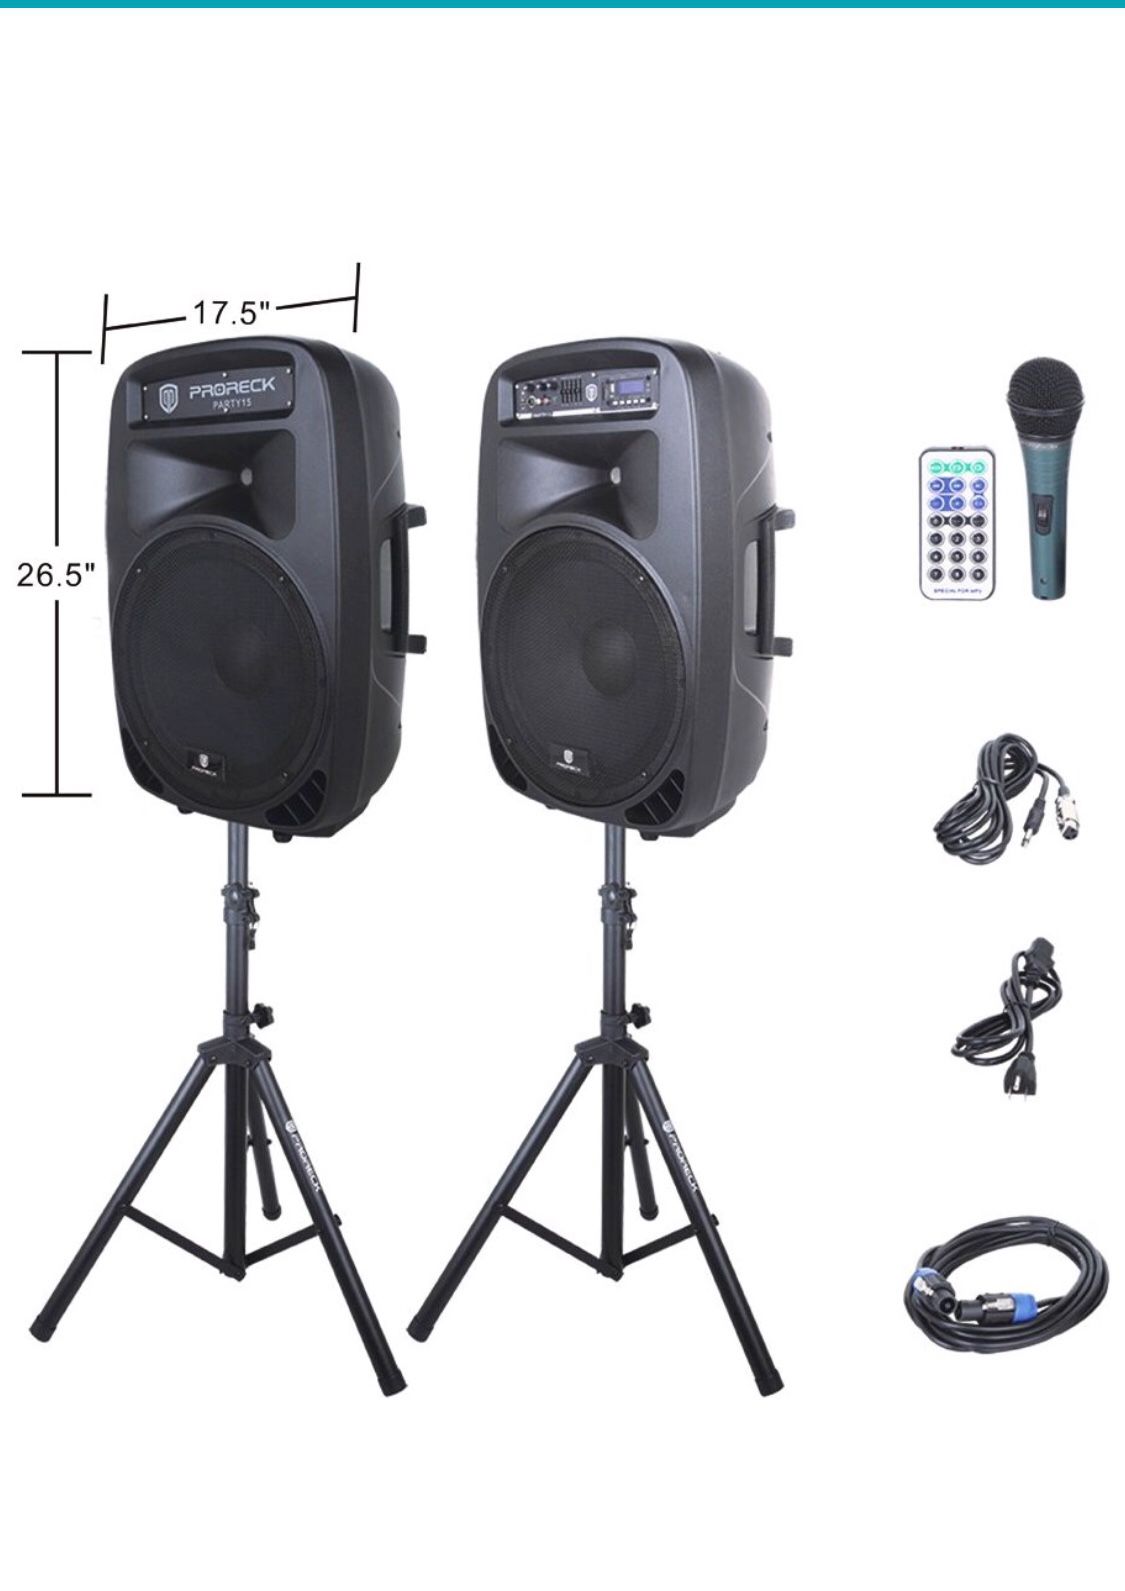 PRORECK PARTY 15 Portable 15-Inch 2000 Watt 2-Way Powered PA Speaker System Combo Set with Bluetooth/USB/SD Card Reader/ FM Radio/Remote Control/LED